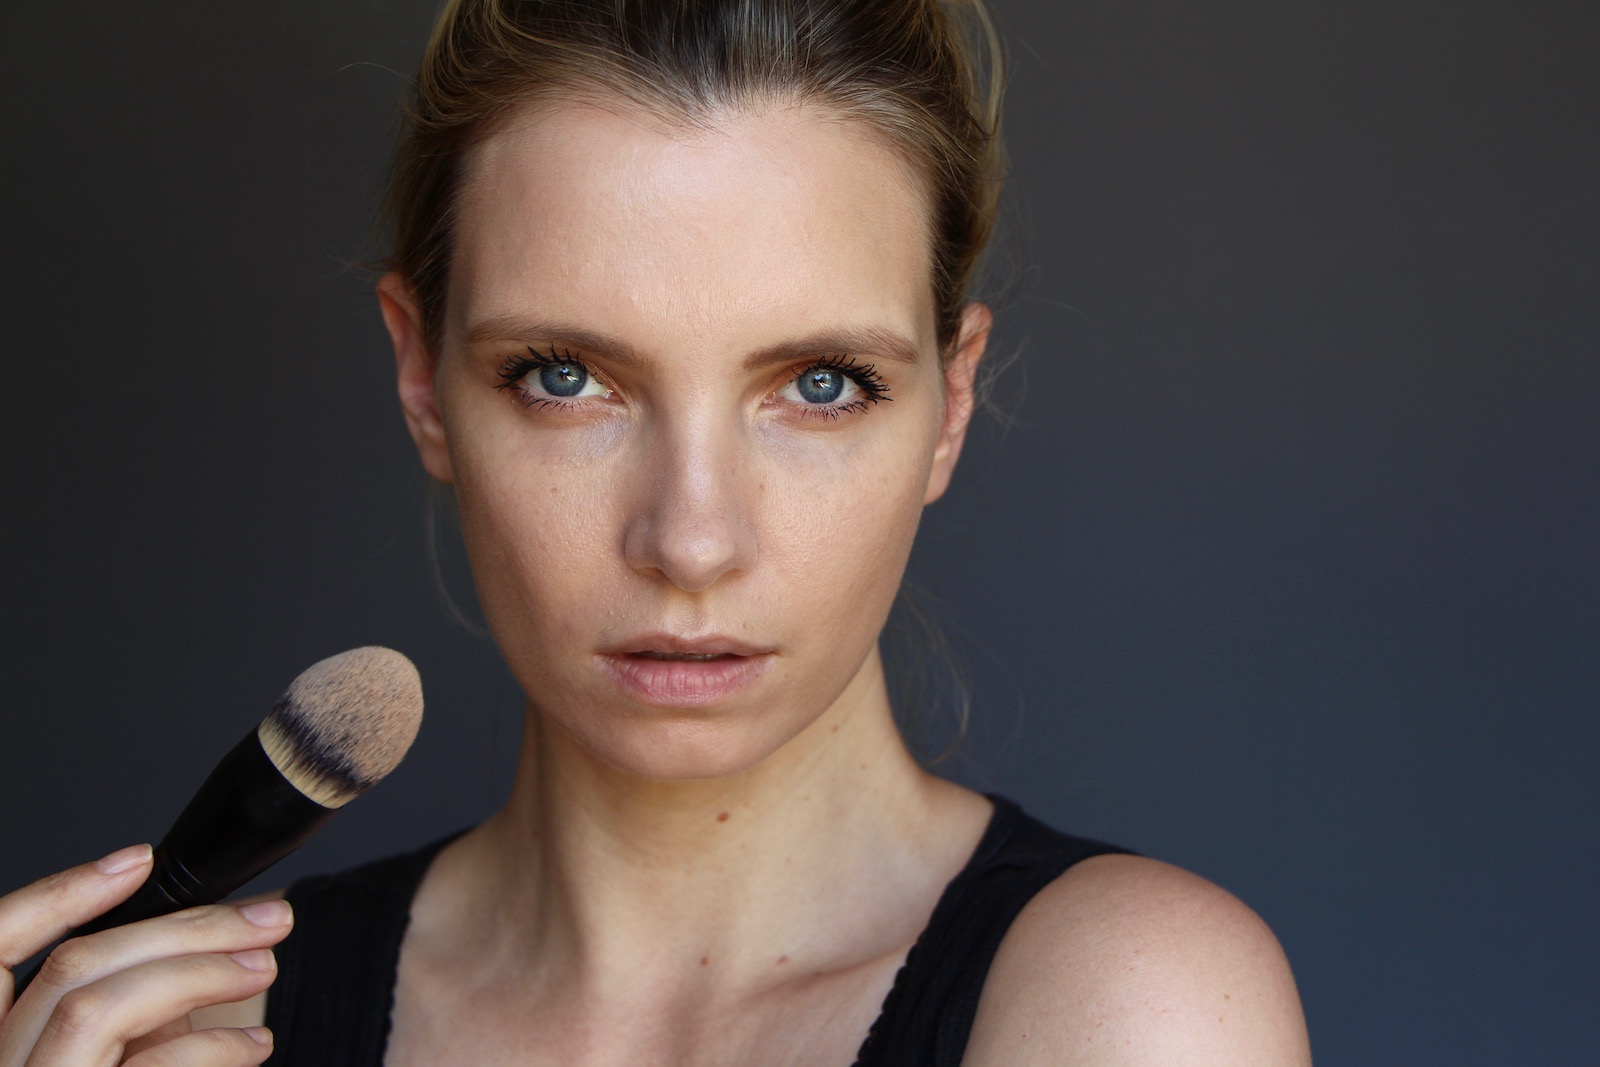 Chanel Foundations: Les Beiges vs Perfection Lumiere Velvet - Ruth Crilly